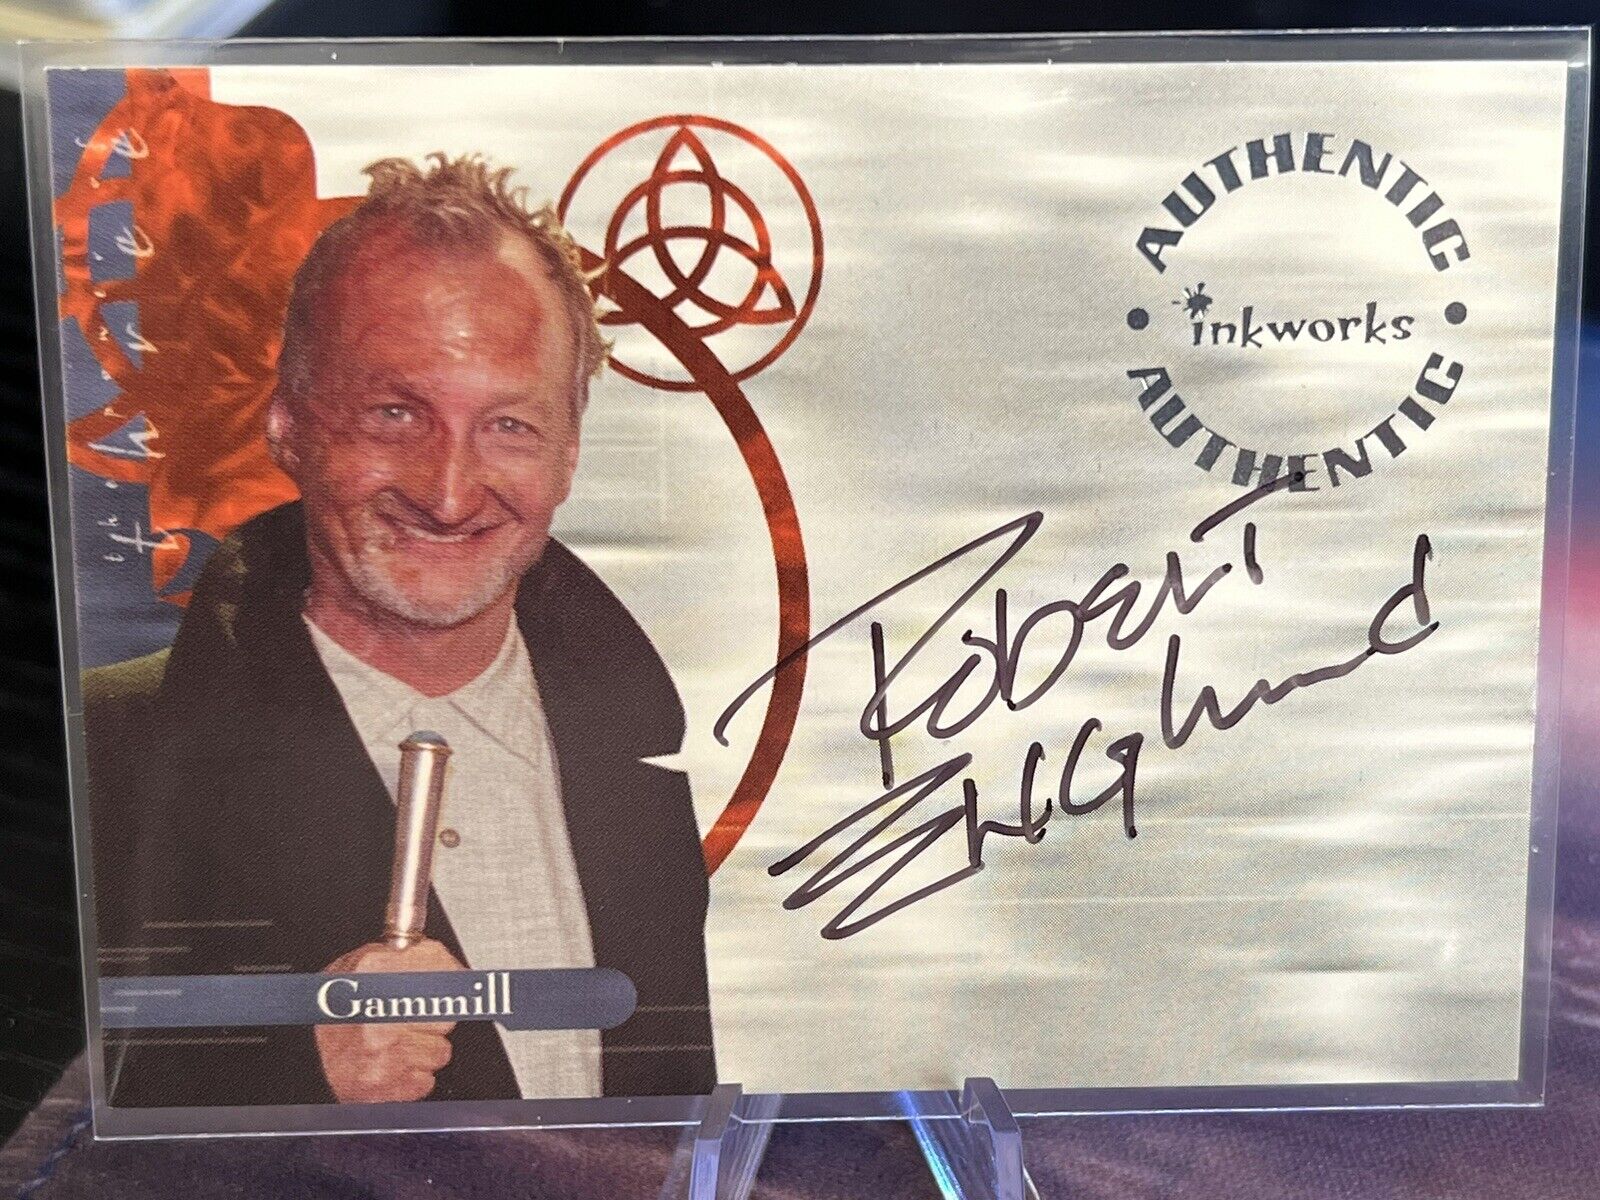 CHARMED  ROBERT ENGLUND as Gammill Autographed card# A10 Inkworks